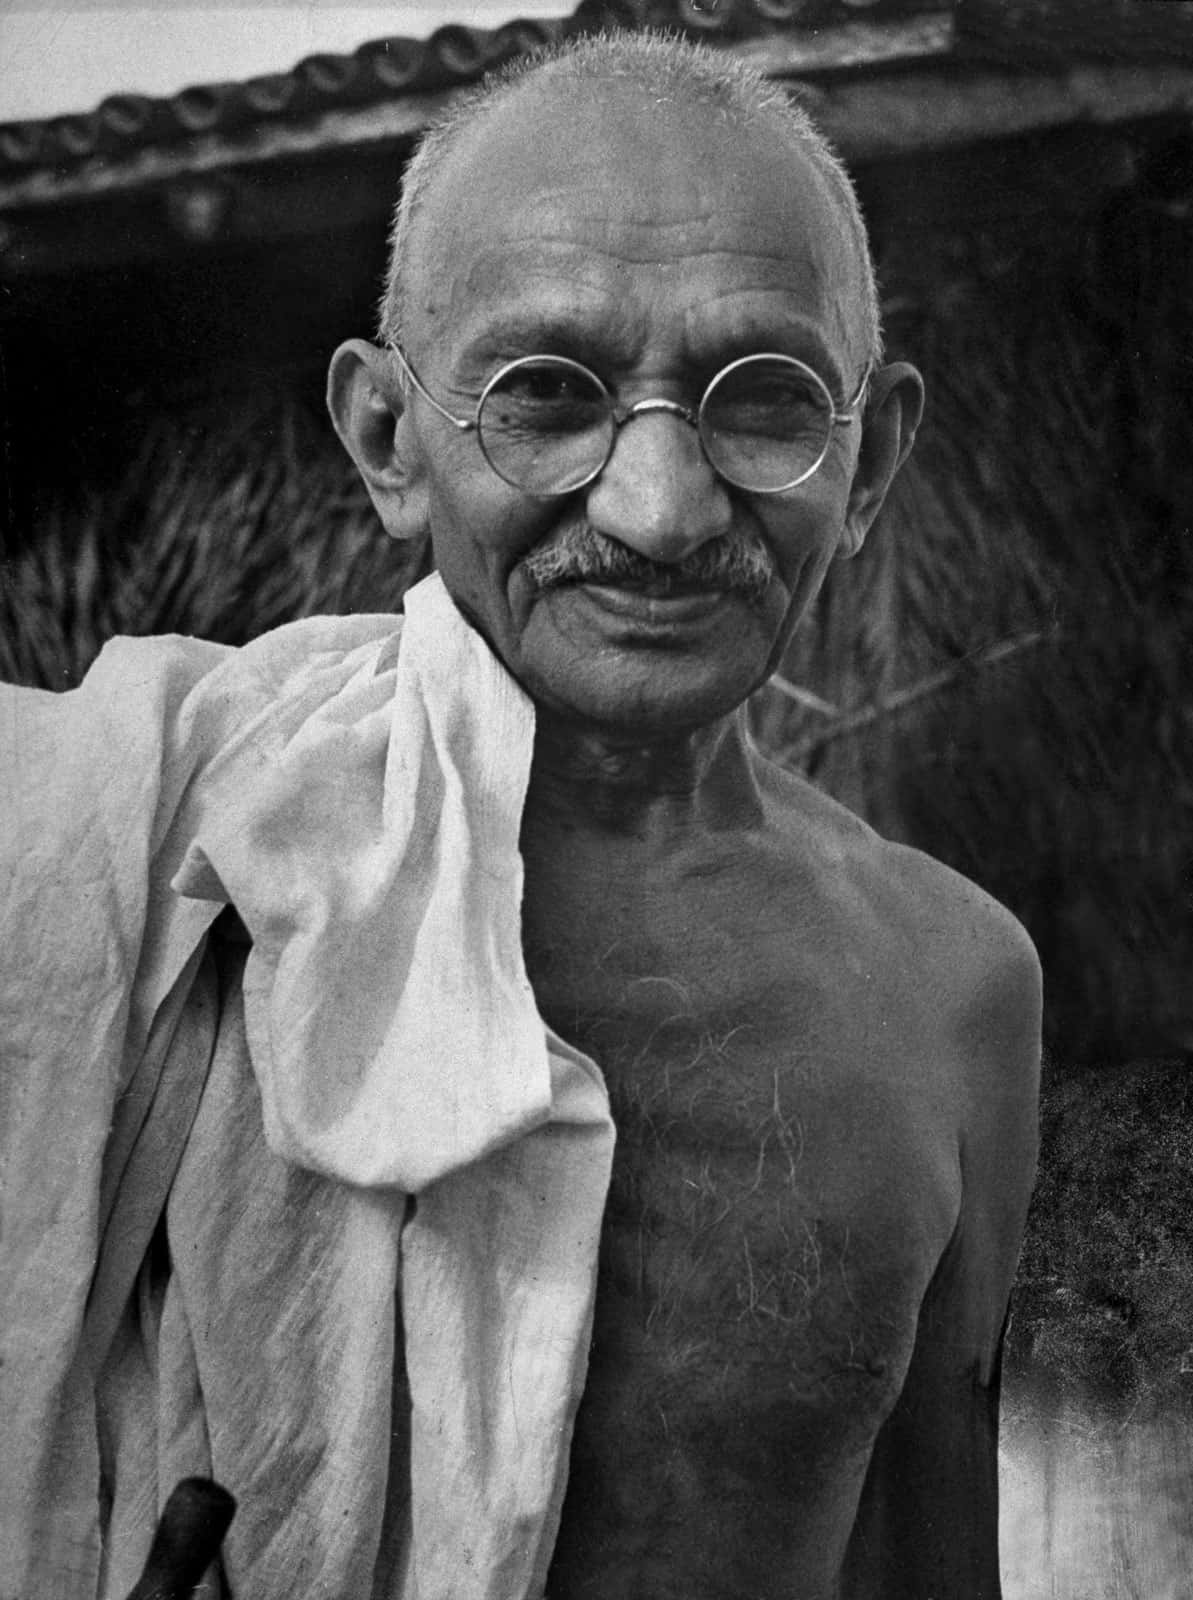 “Be the change you wish to see in the world.” - Mahatma Gandhi